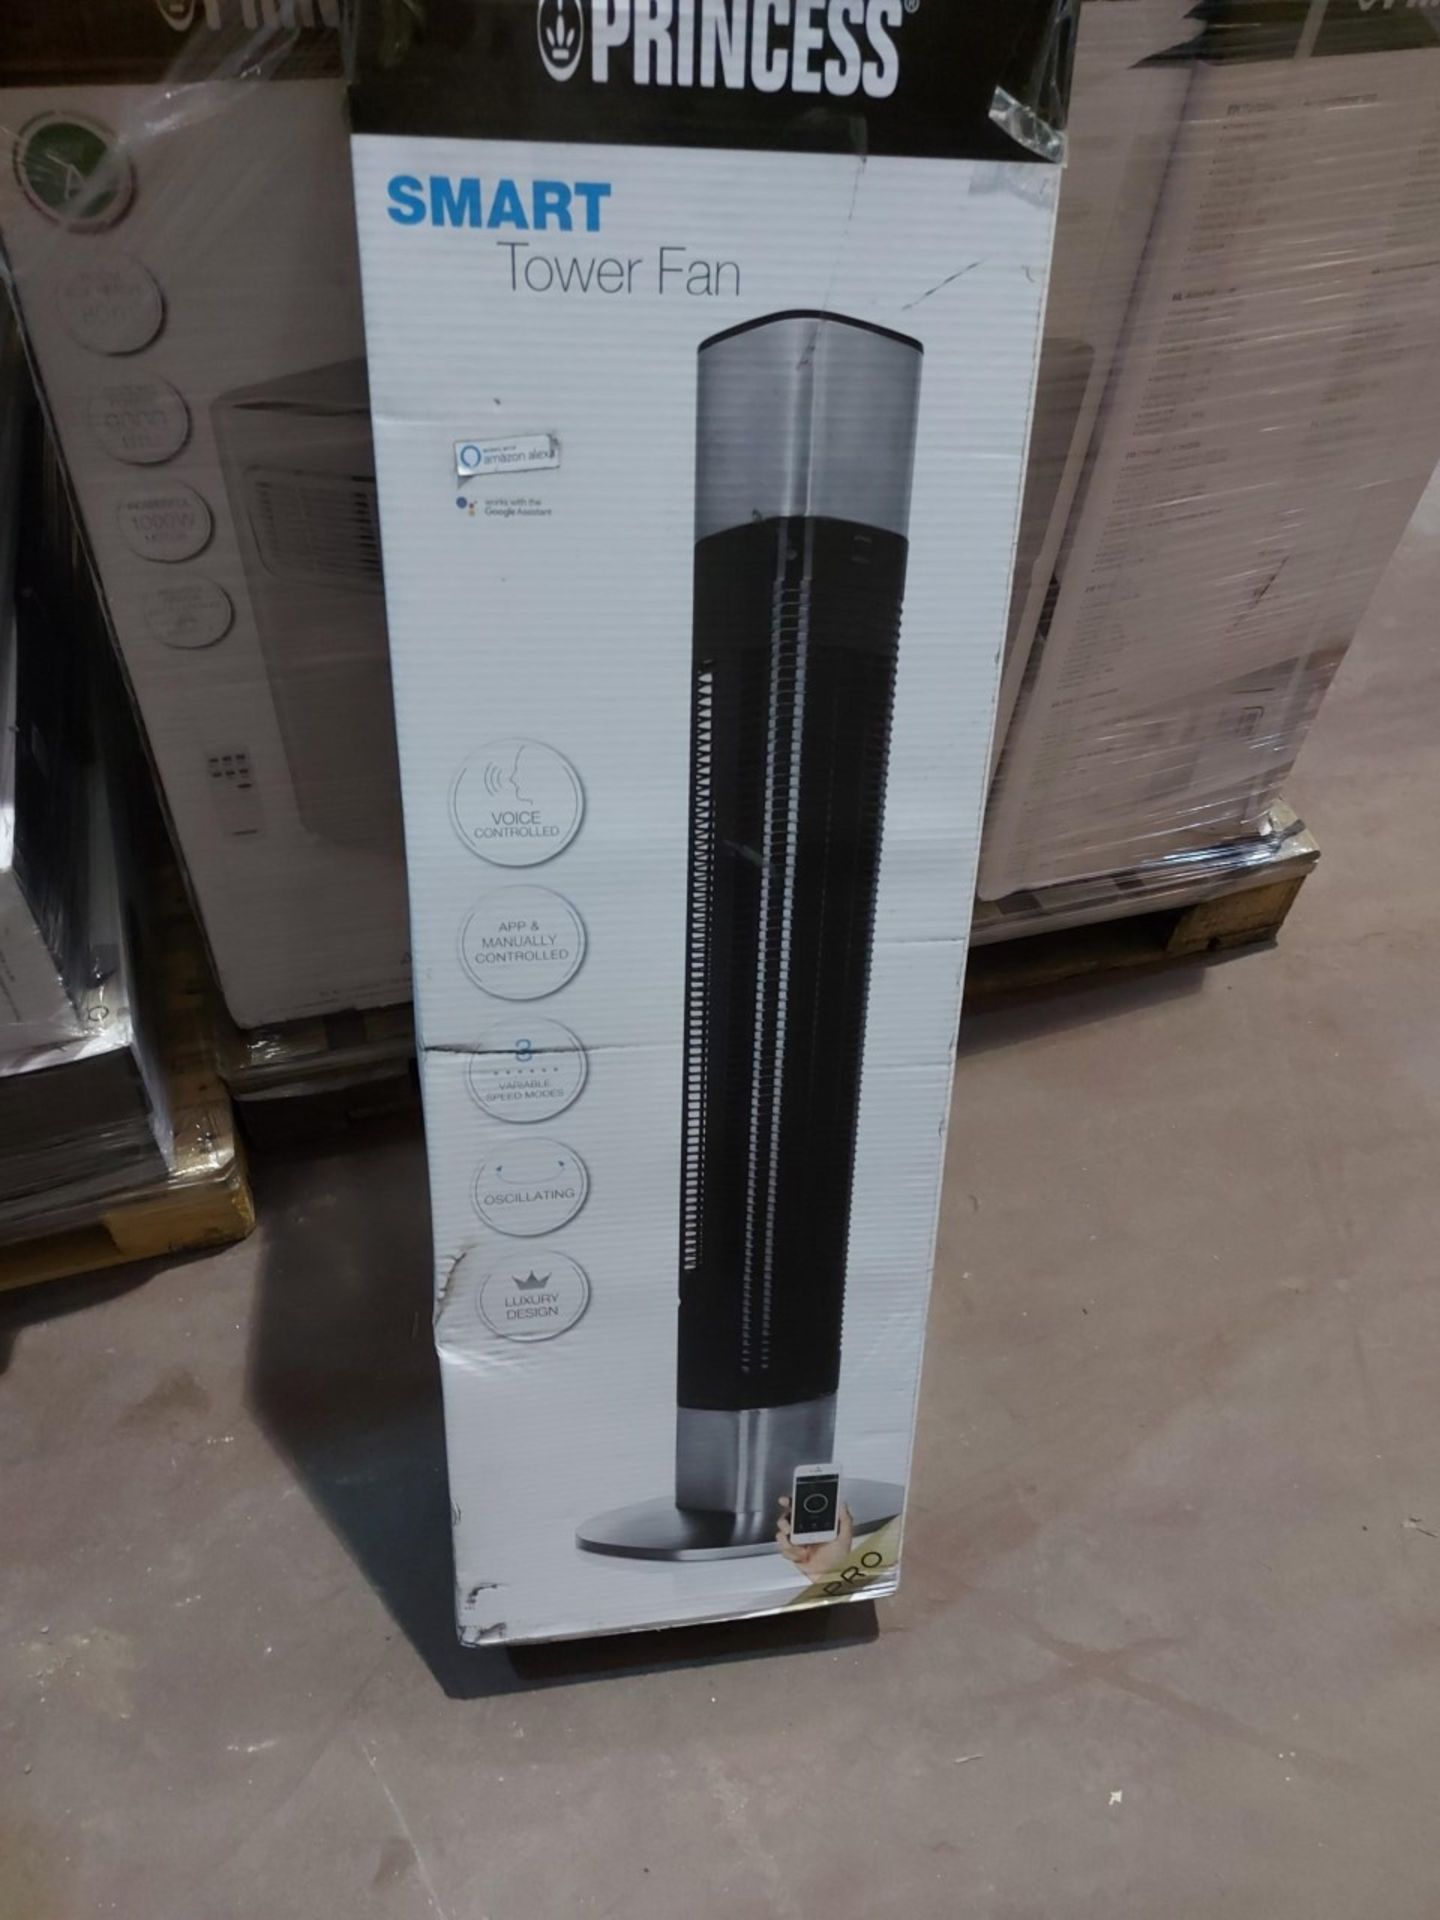 PALLET TO CONTAIN 10 x PRINCESS 350000 Smart Tower Fan - Black. RRP £119.99 EACH. Control remotely